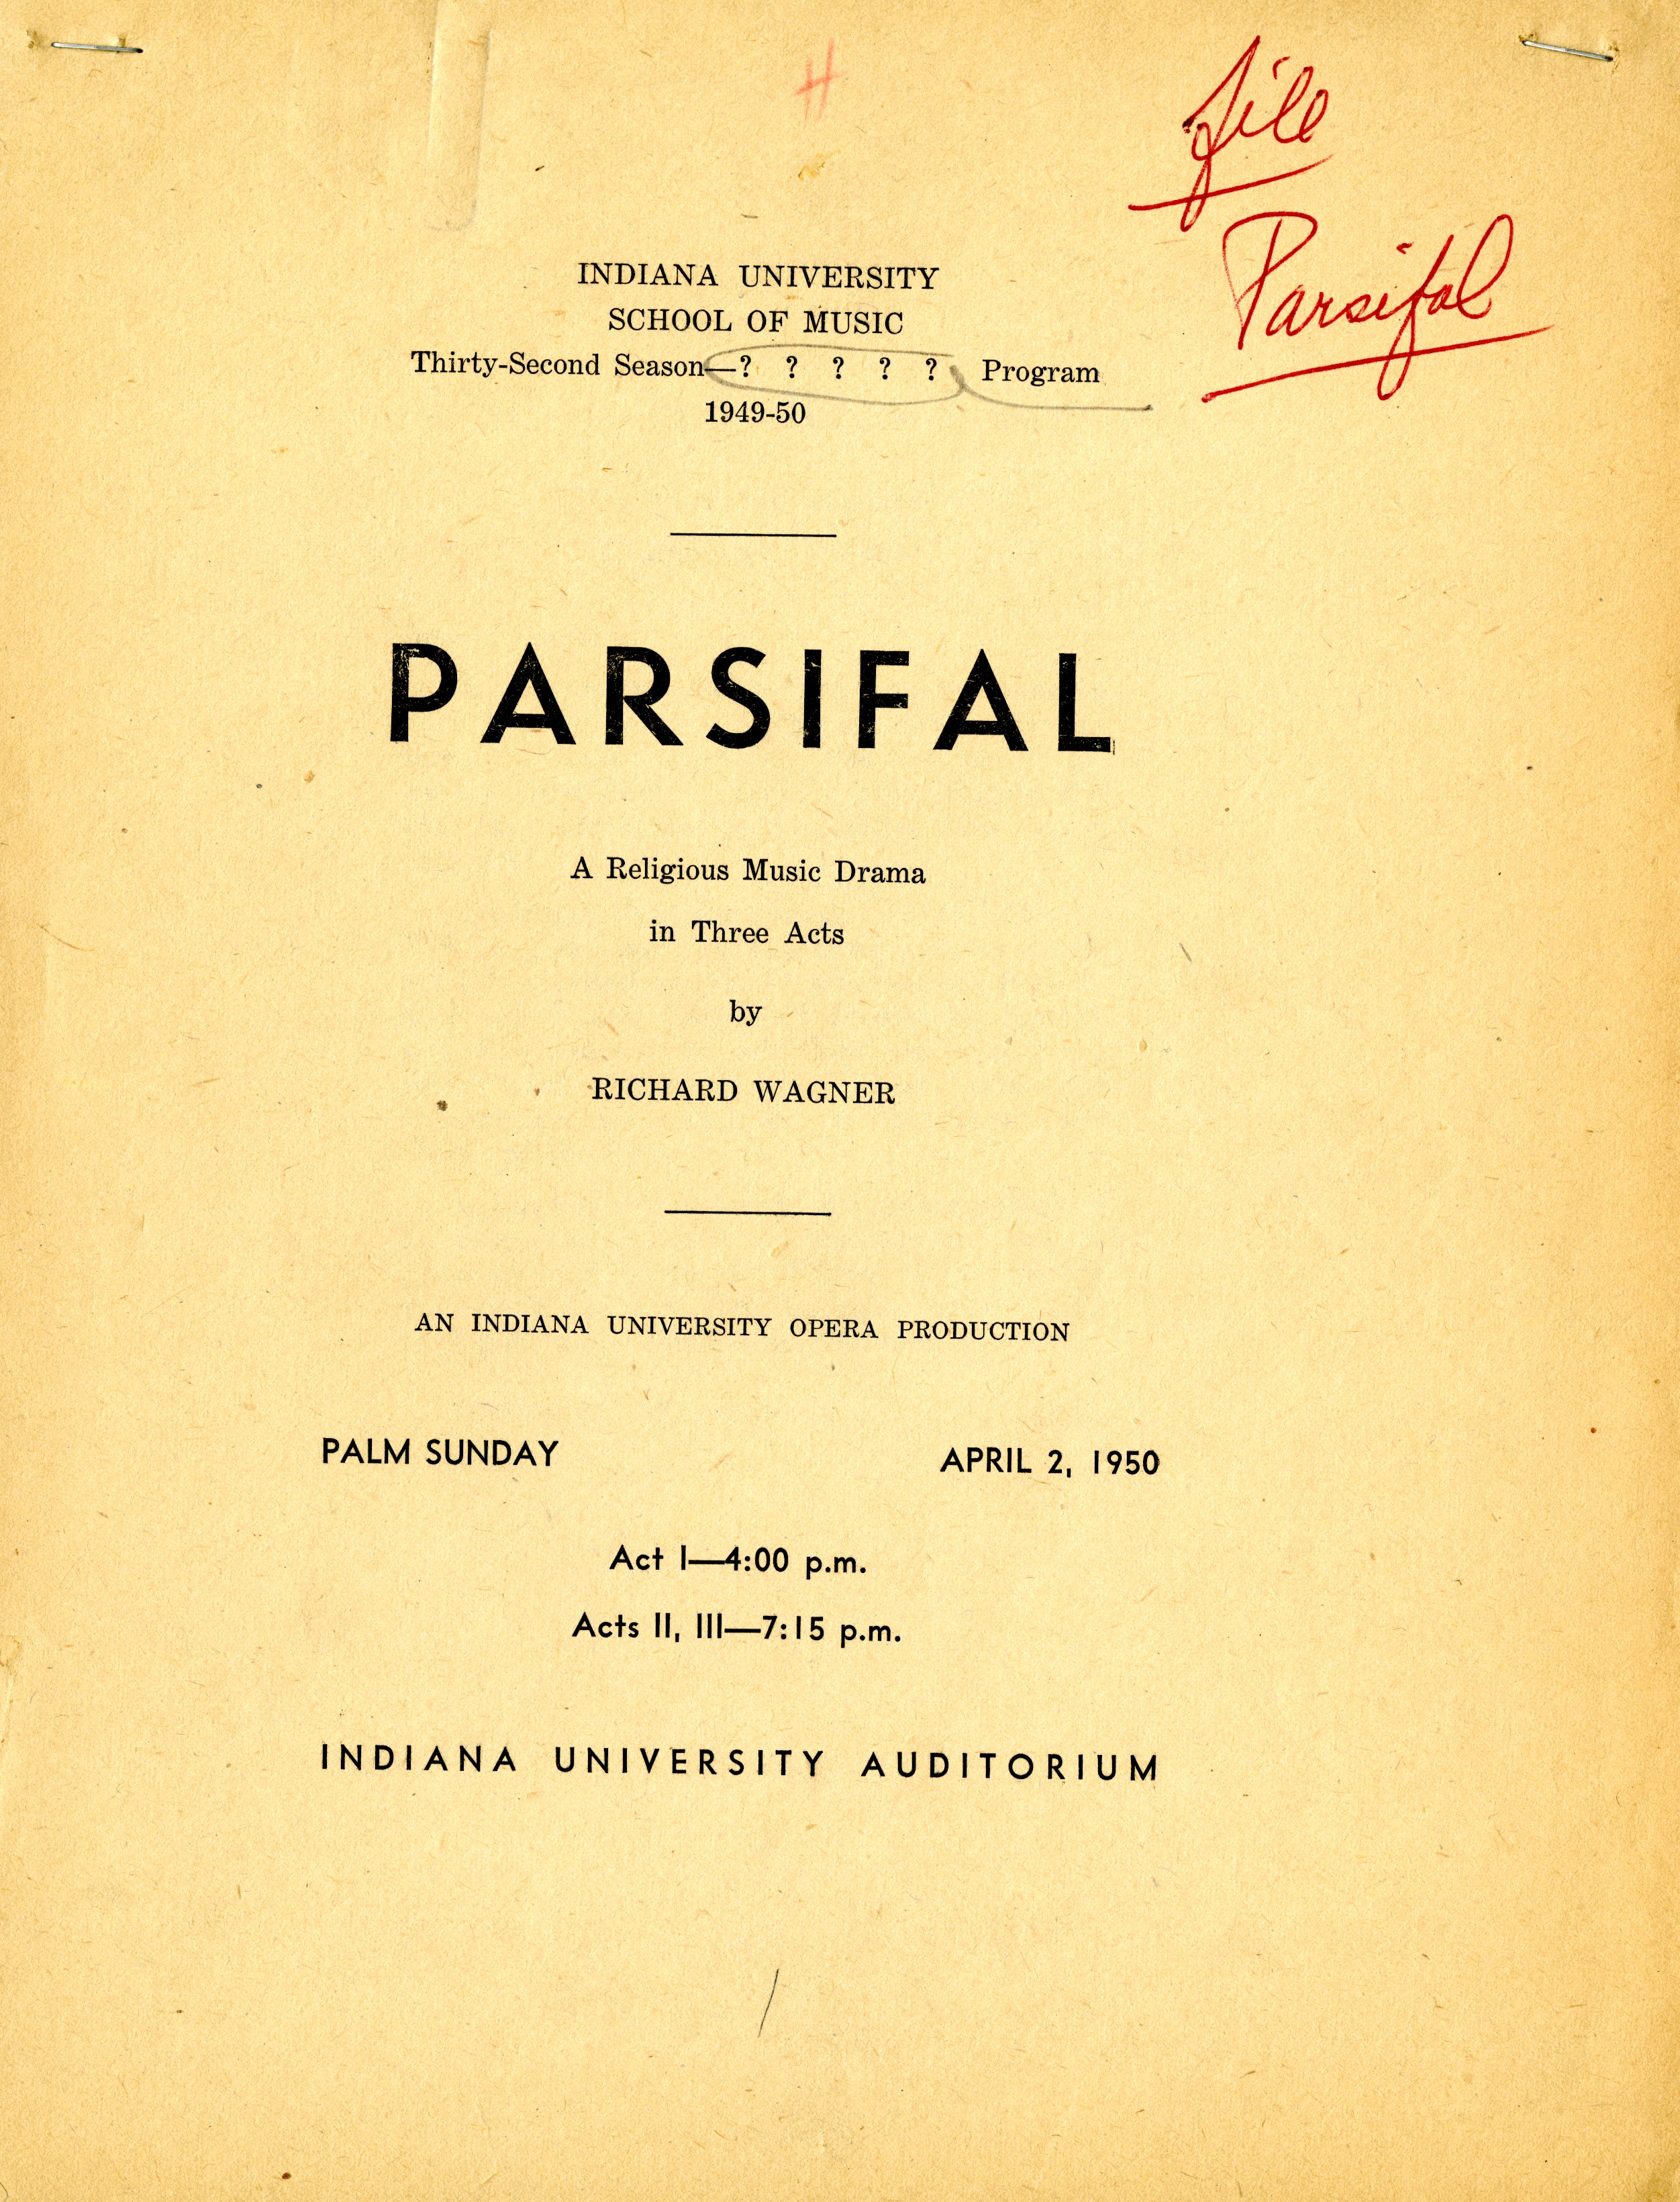 Program with the following text : INDIANA UNIVERSITY SCHOOL OF MUSIC Thirty-Second Season Parsifal: A Religious Music Drama in Three Acts by Richard Wagner An Indiana University Opera Production Palm Sunday, April 2, 1950 Act 1 - 4:00 pm Act 2 - 7:15 pm Indiana University Auditorium